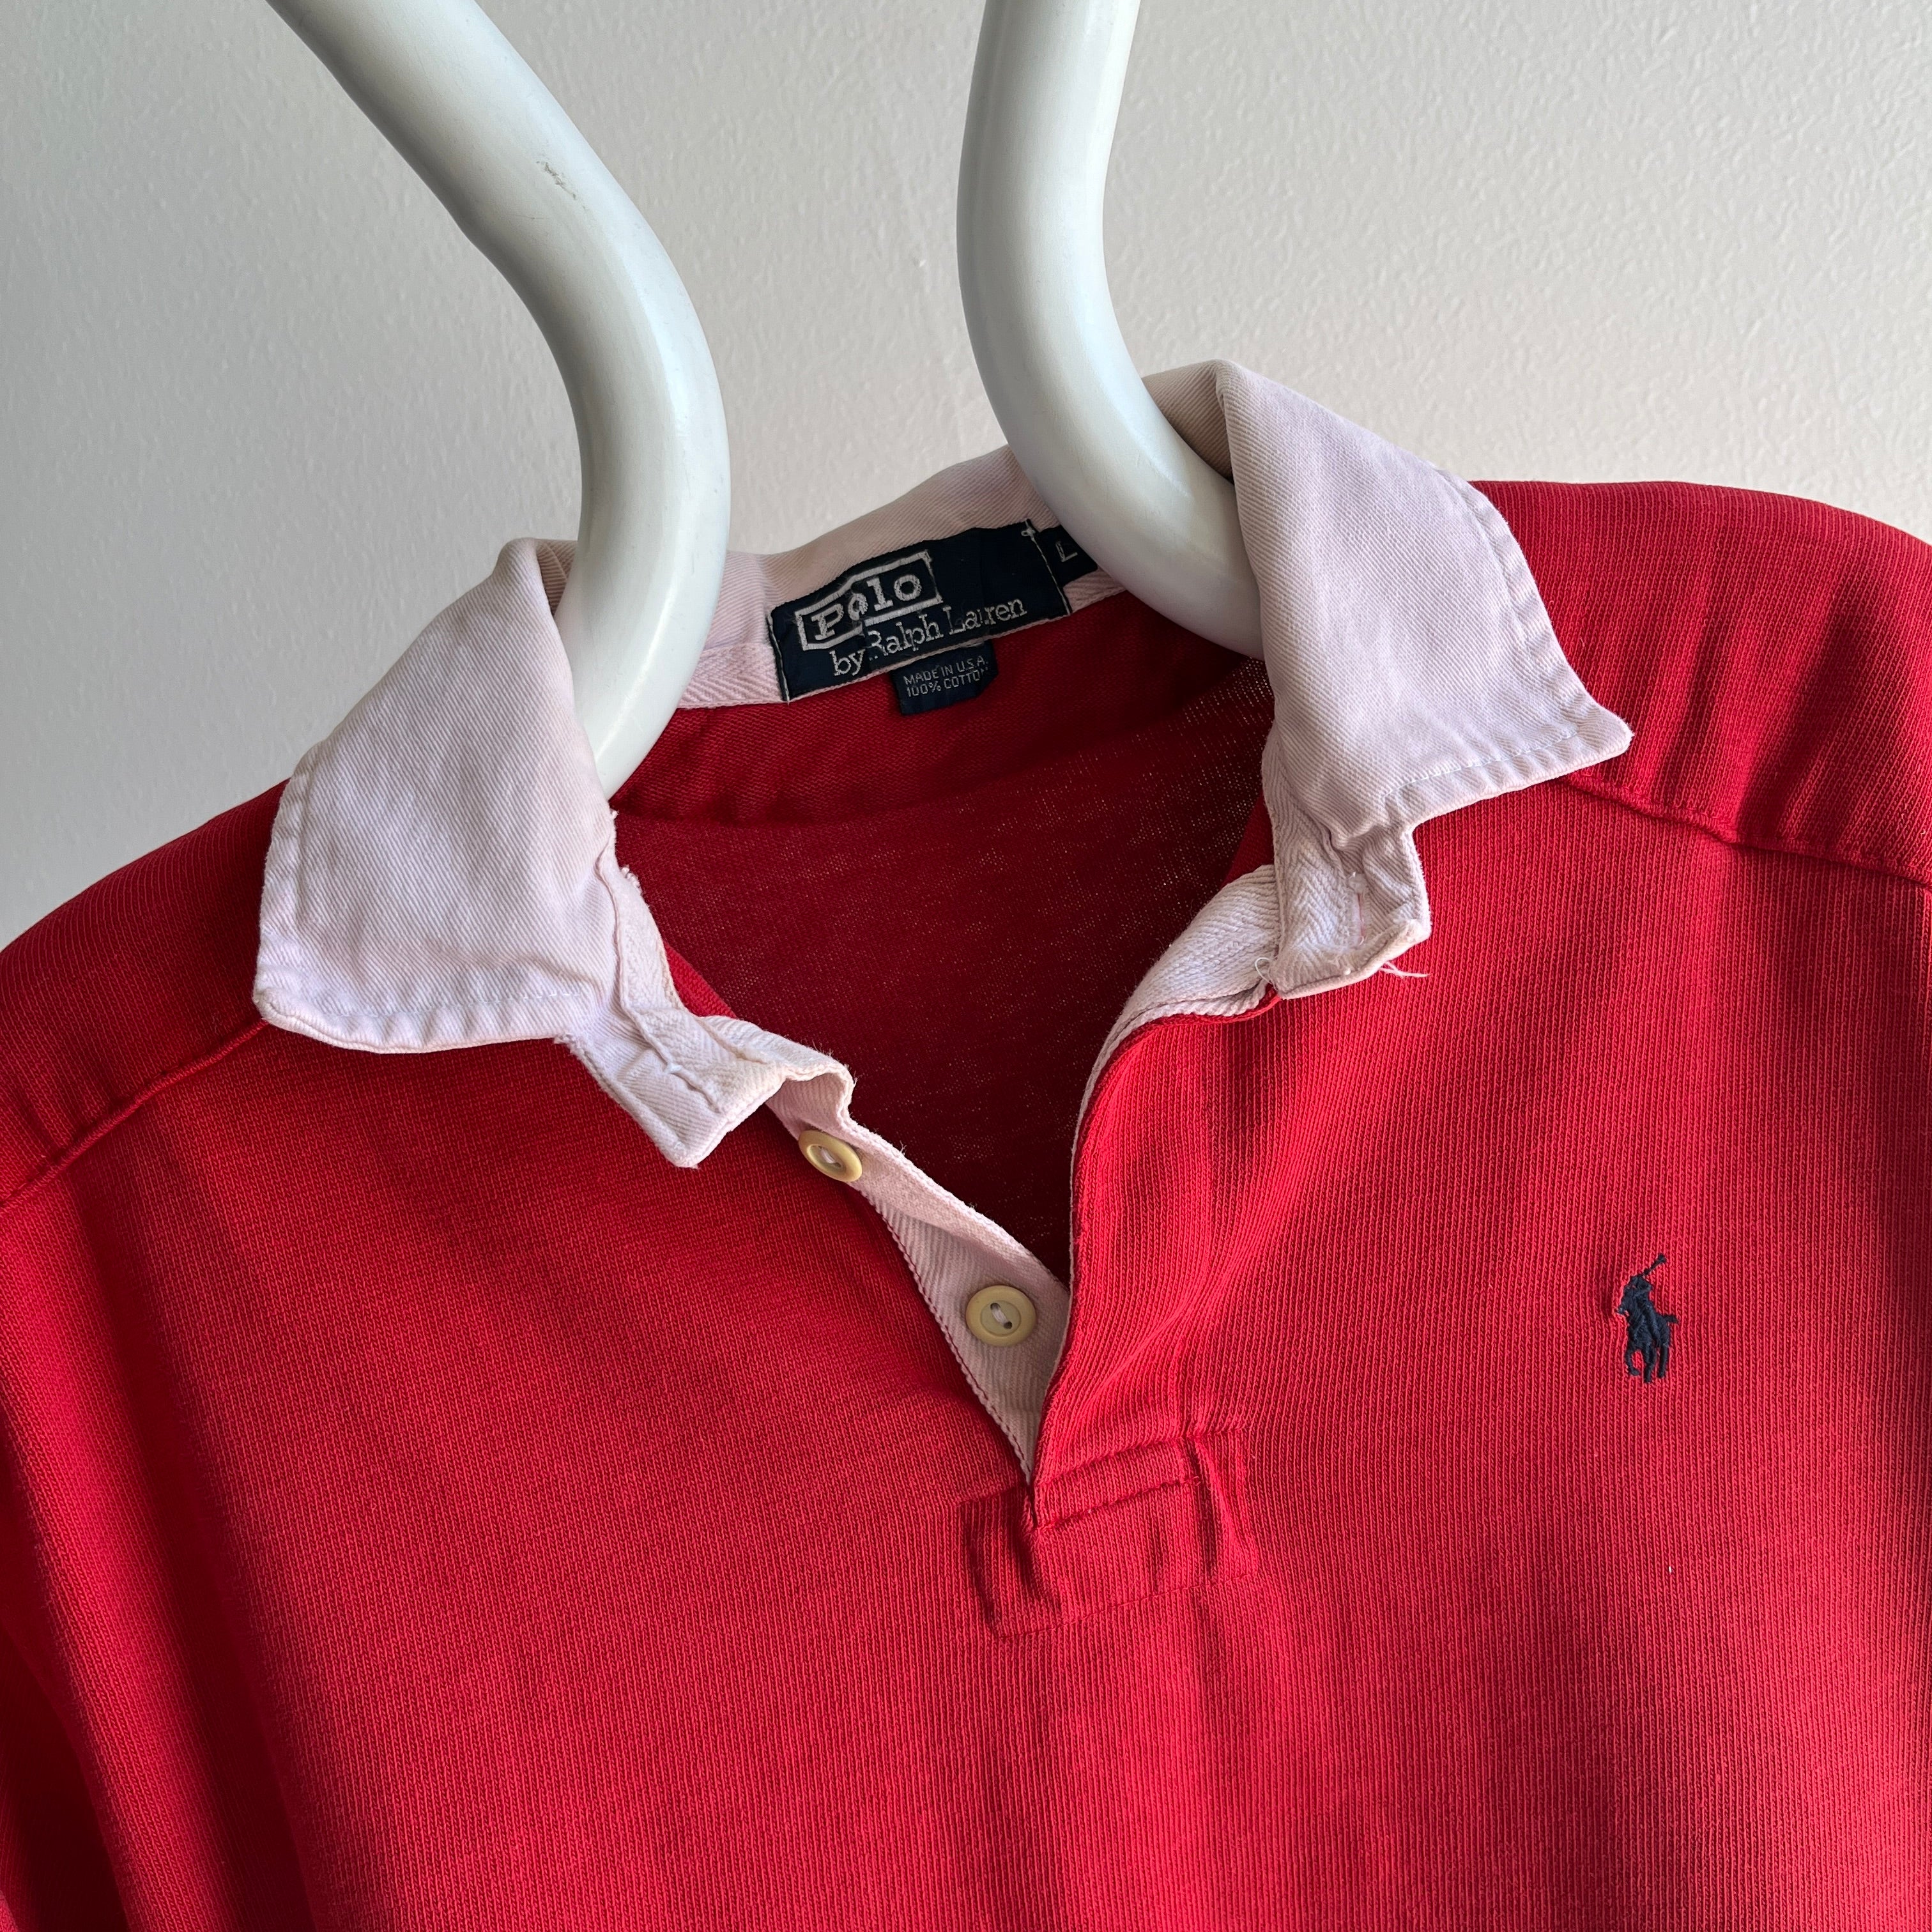 1980/90s USA Made Ralph Lauren Rugby Shirt - With Staining